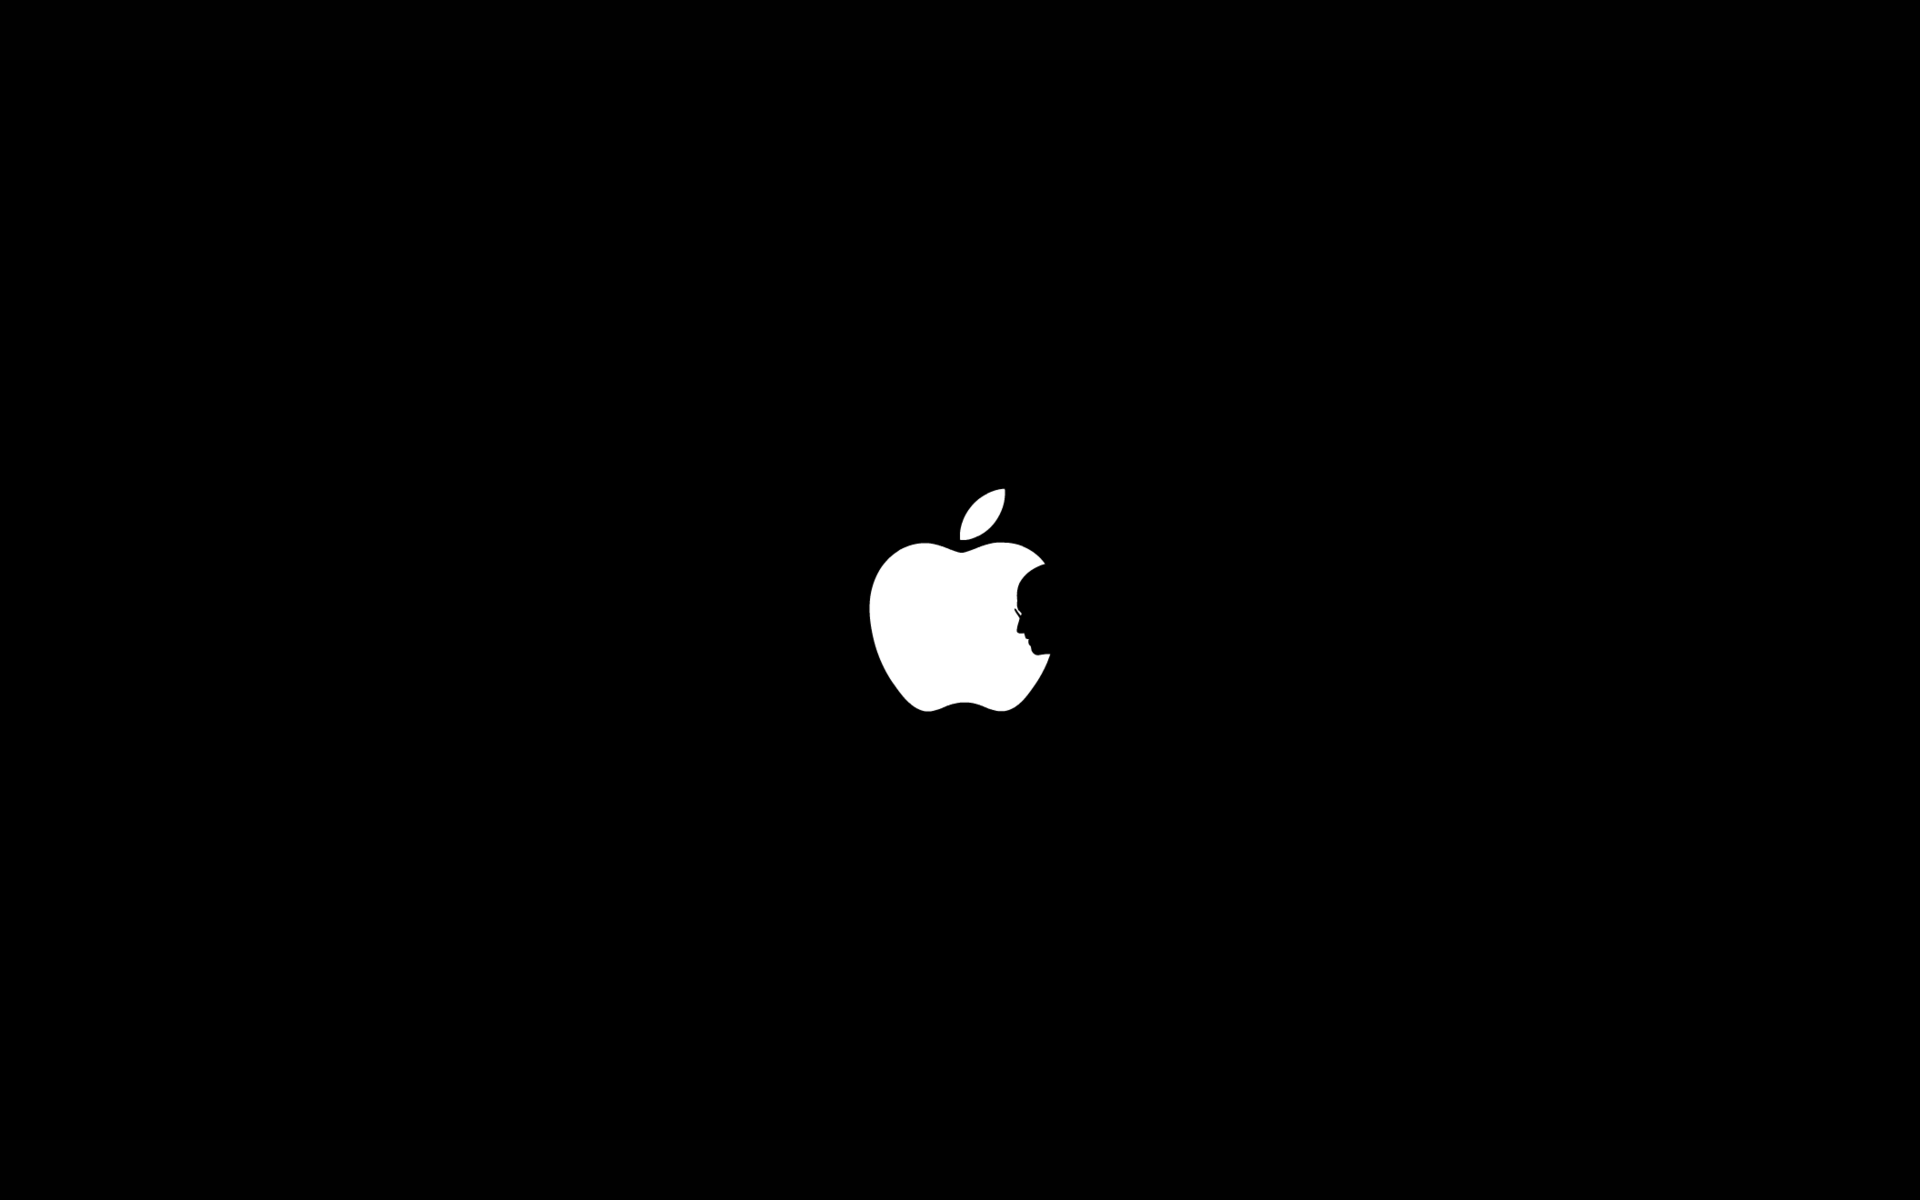 New 2016 Small Apple Logo - Four things Apple has launched but no one knows